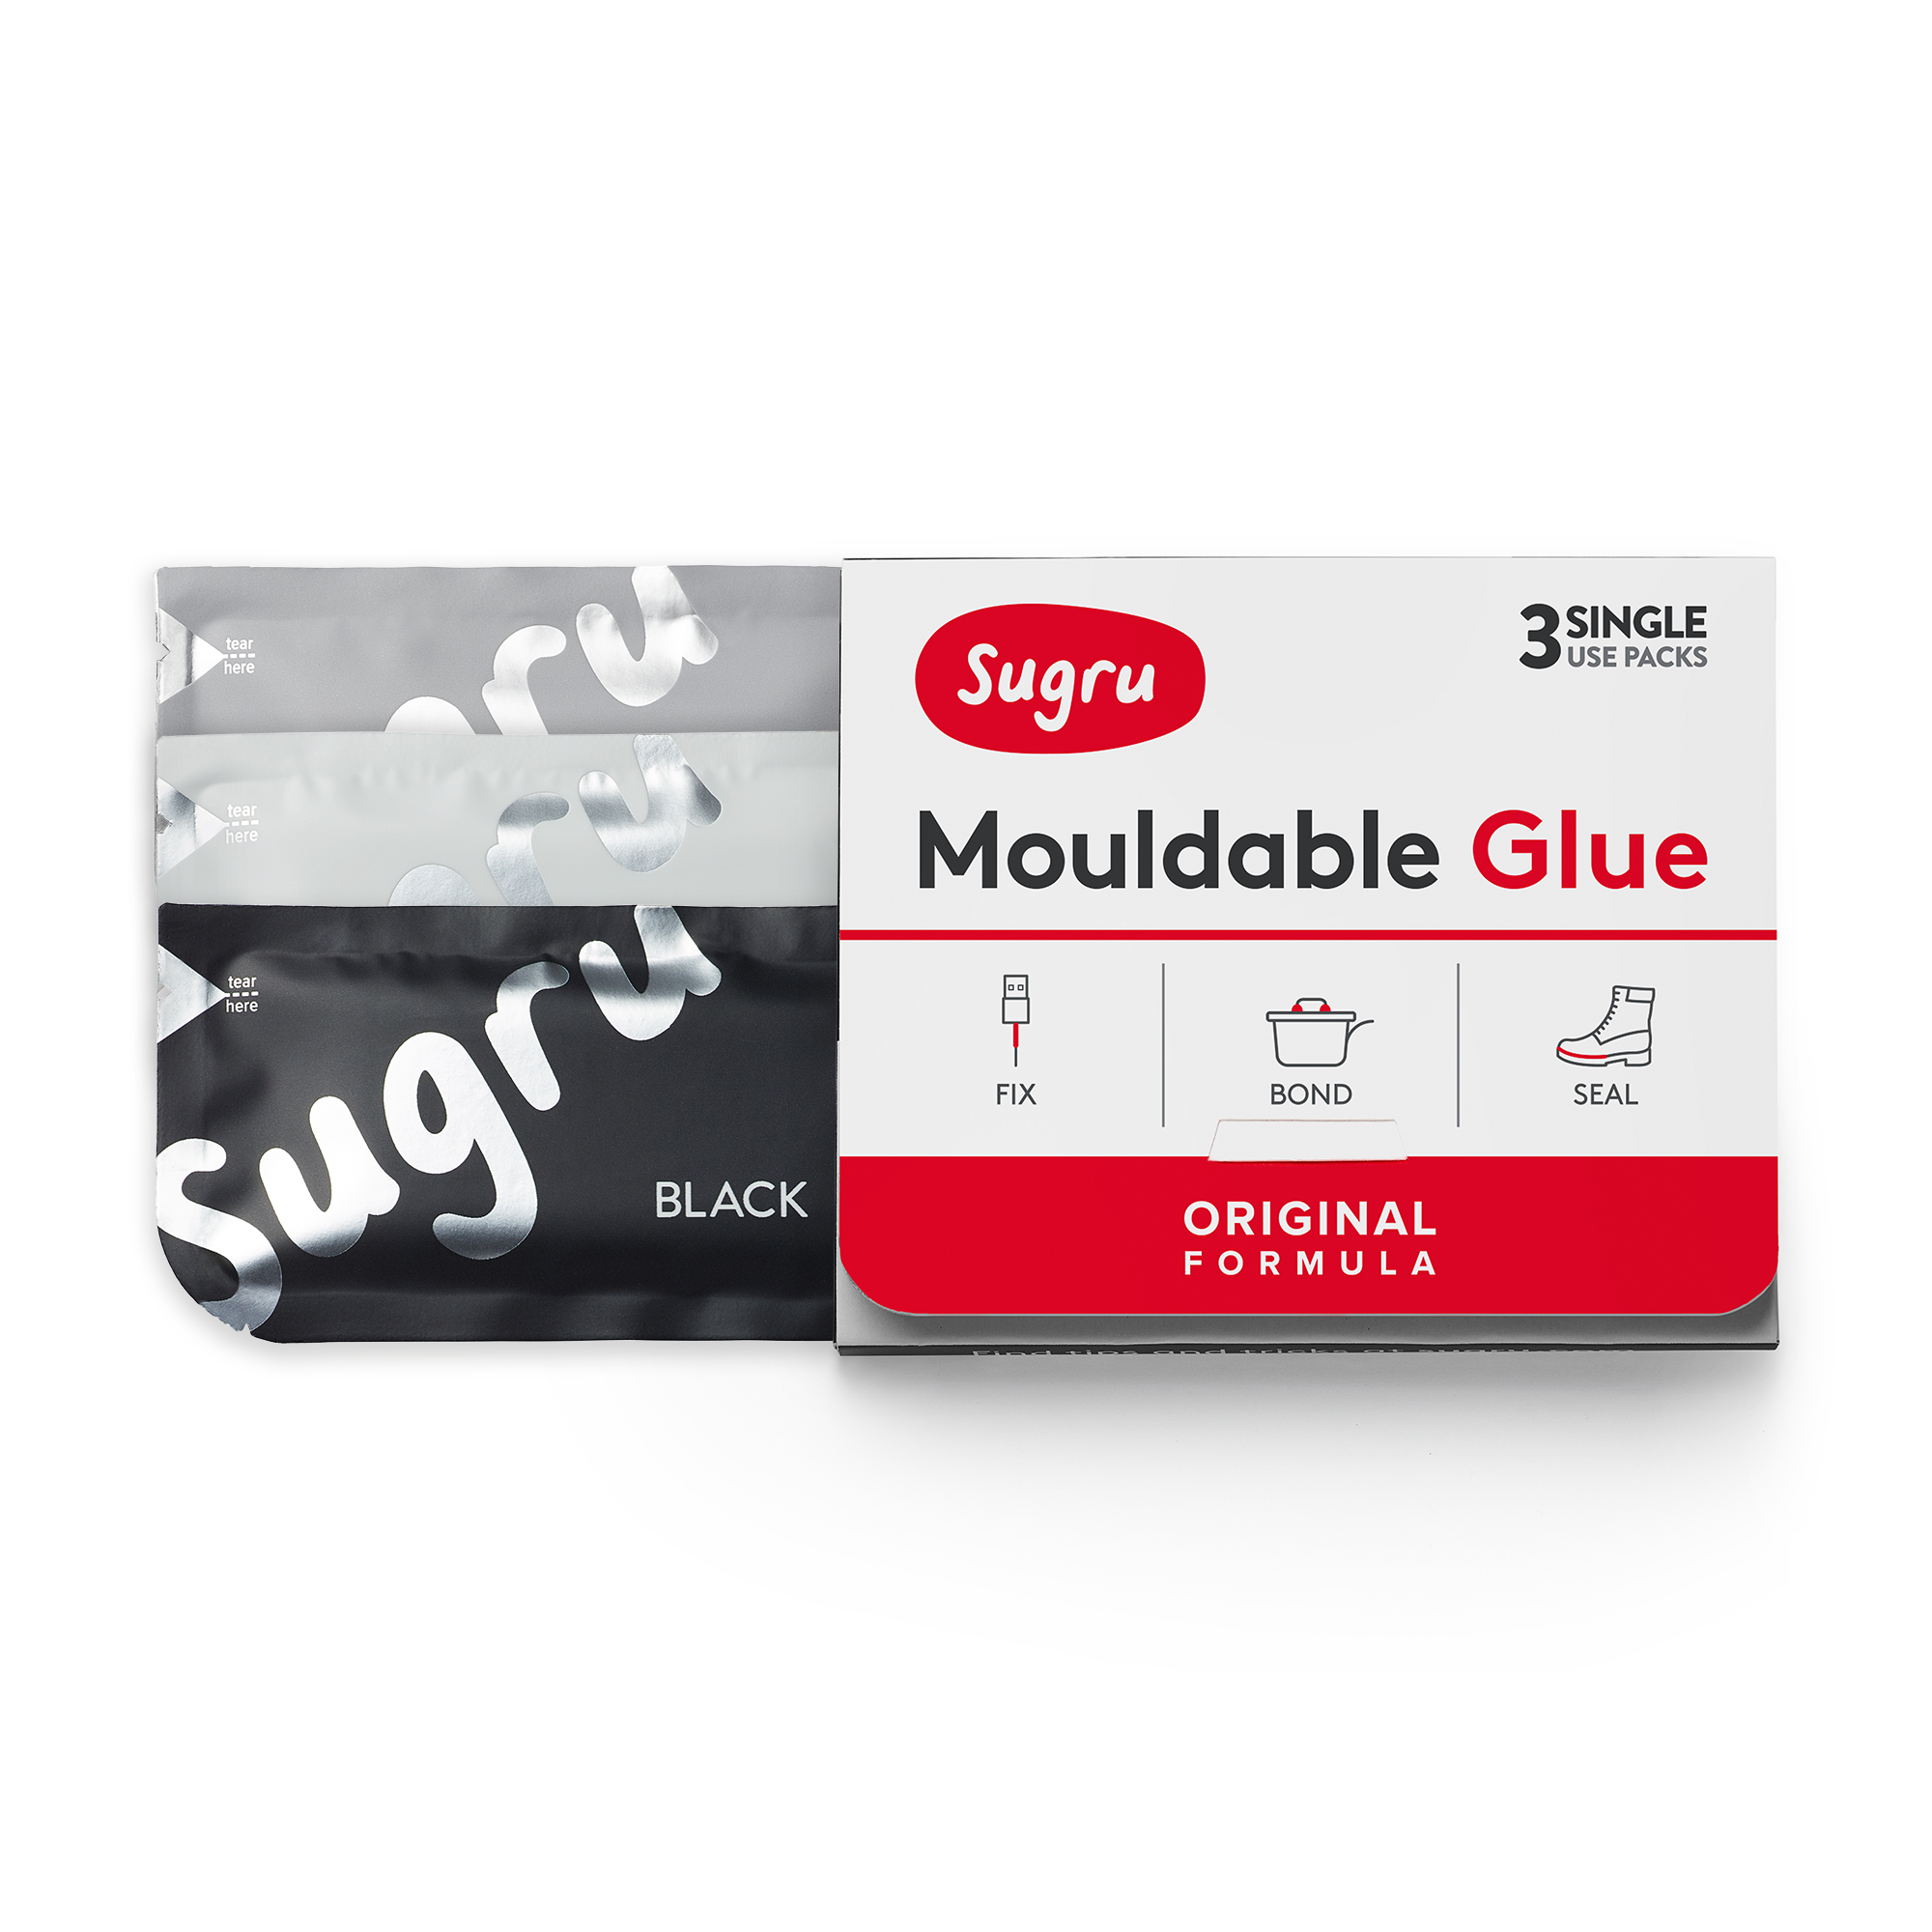 The World's First Mouldable Glue